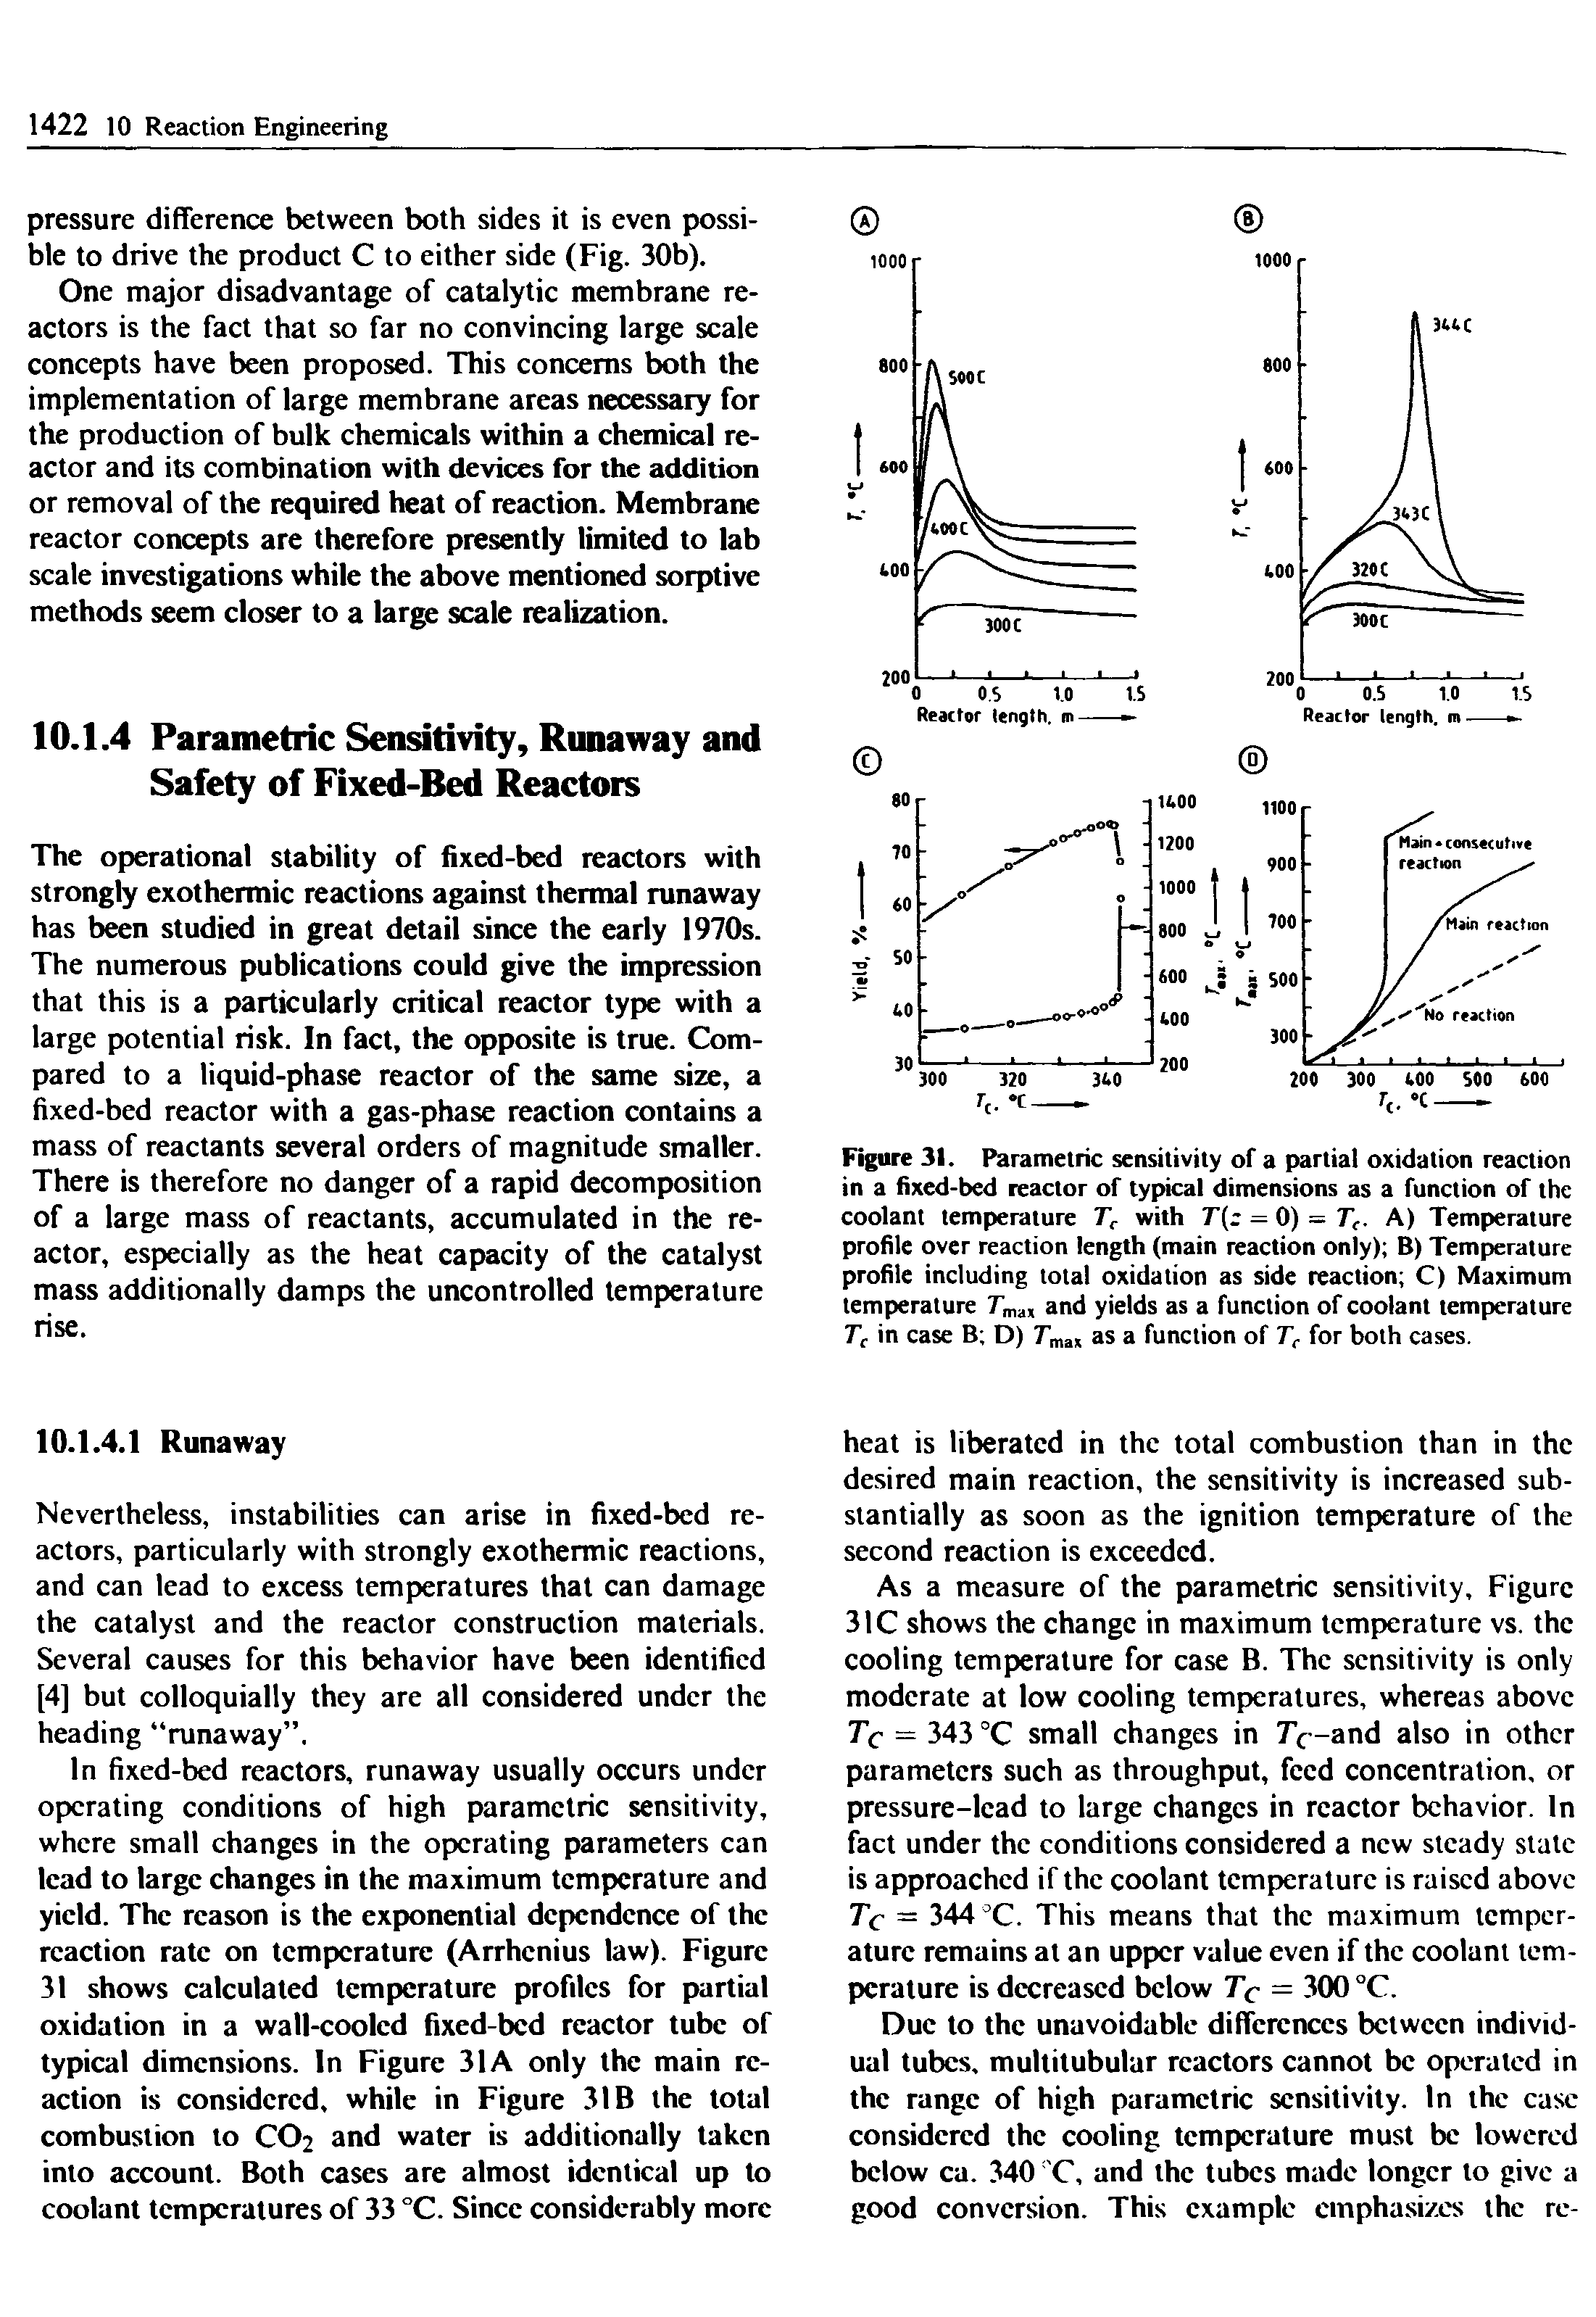 Figure 31. Parametric sensitivity of a partial oxidation reaction in a fixed-bed reactor of typical dimensions as a function of the coolant temperature Tc with T( = 0) = Tc. A) Temperature profile over reaction length (main reaction only) B) Temperature profile including total oxidation as side reaction C) Maximum temperature Tma, and yields as a function of coolant temperature Tc in case B D) T max as a function of Tc for both cases.